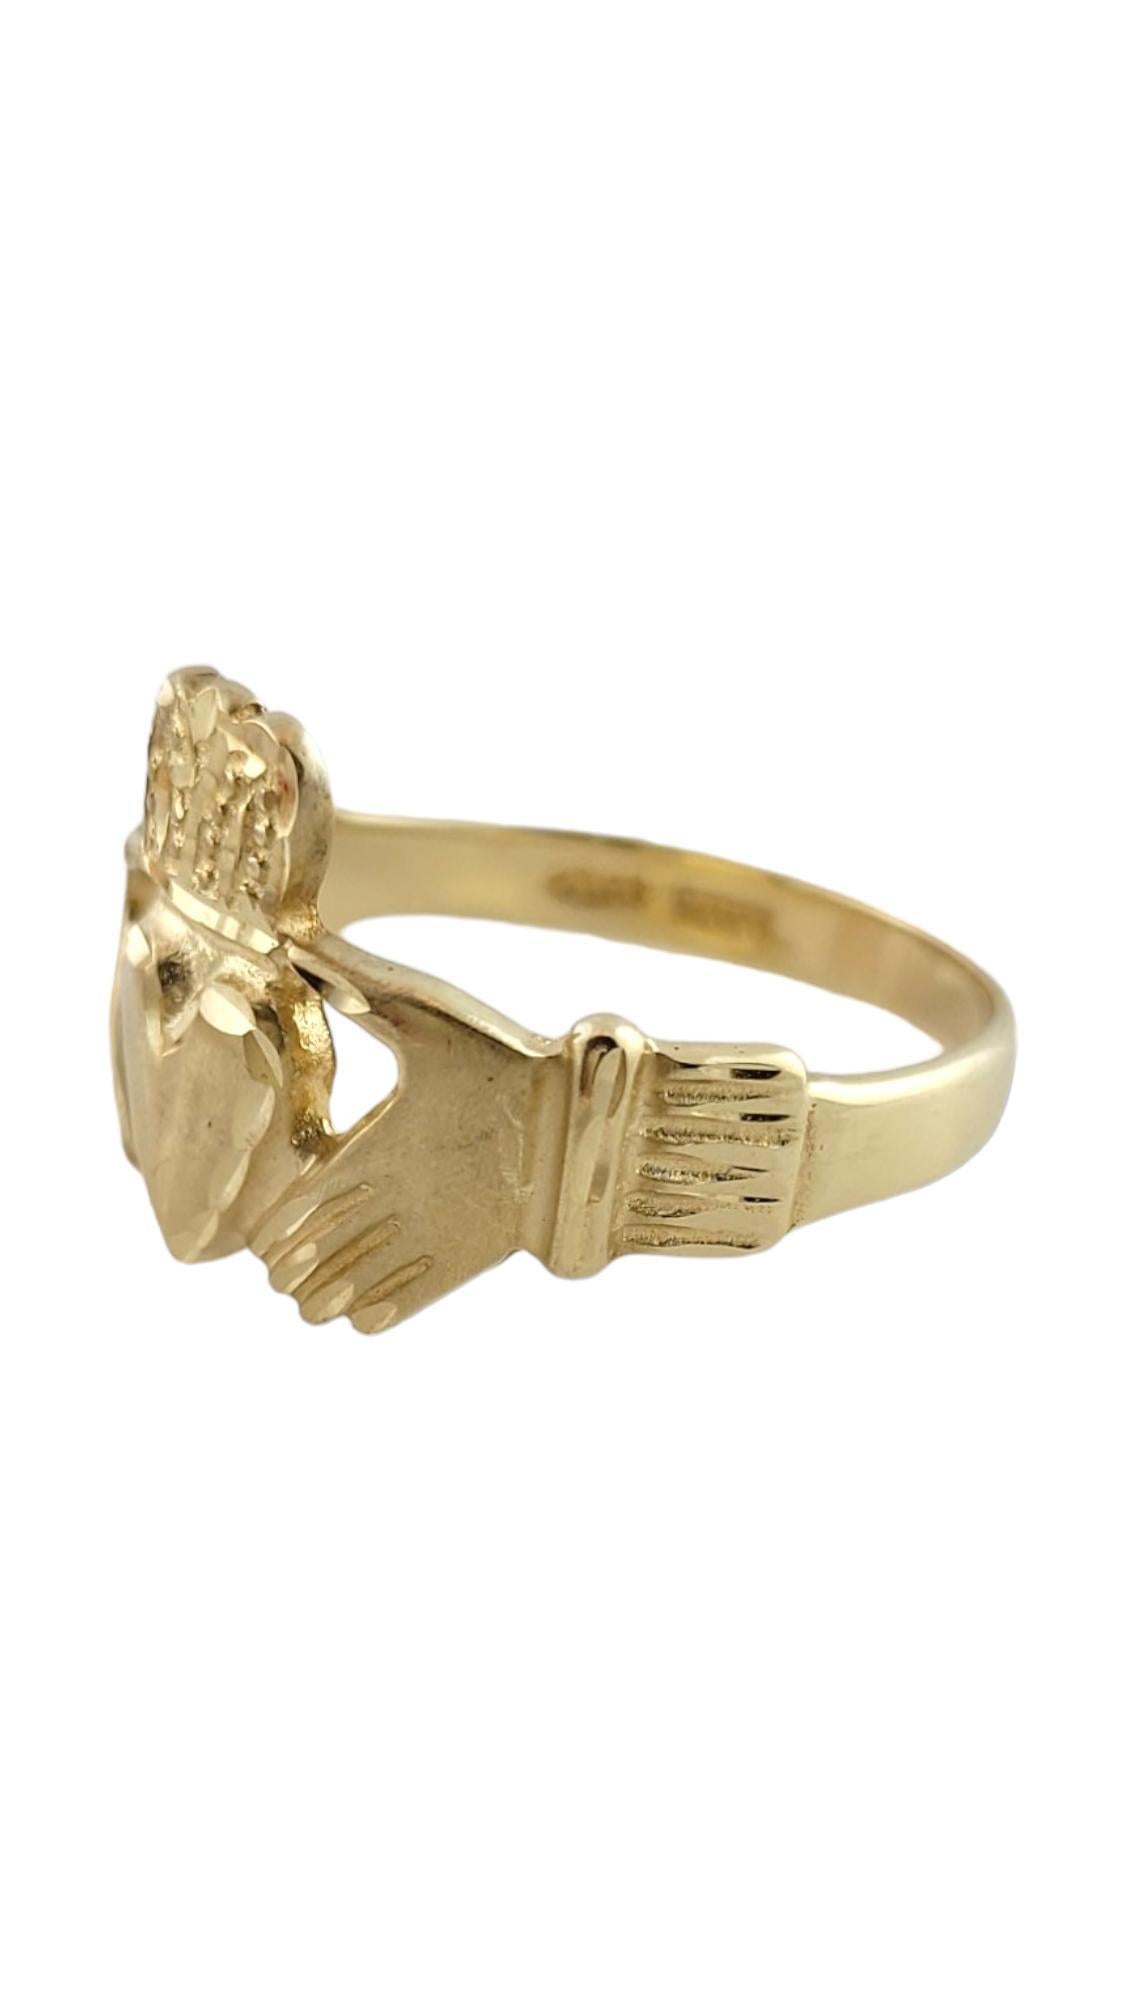 Vintage 14K Yellow Gold Claddagh Ring Size 10.5

This gorgeous Claddagh ring is crafted from 14K yellow gold!

Ring size: 10.5
Shank: 2.95mm
Front: 14.5mm

Weight: 5.3 g/ 3.4 dwt

Hallmark: 14K Mexico

Very good condition, professionally